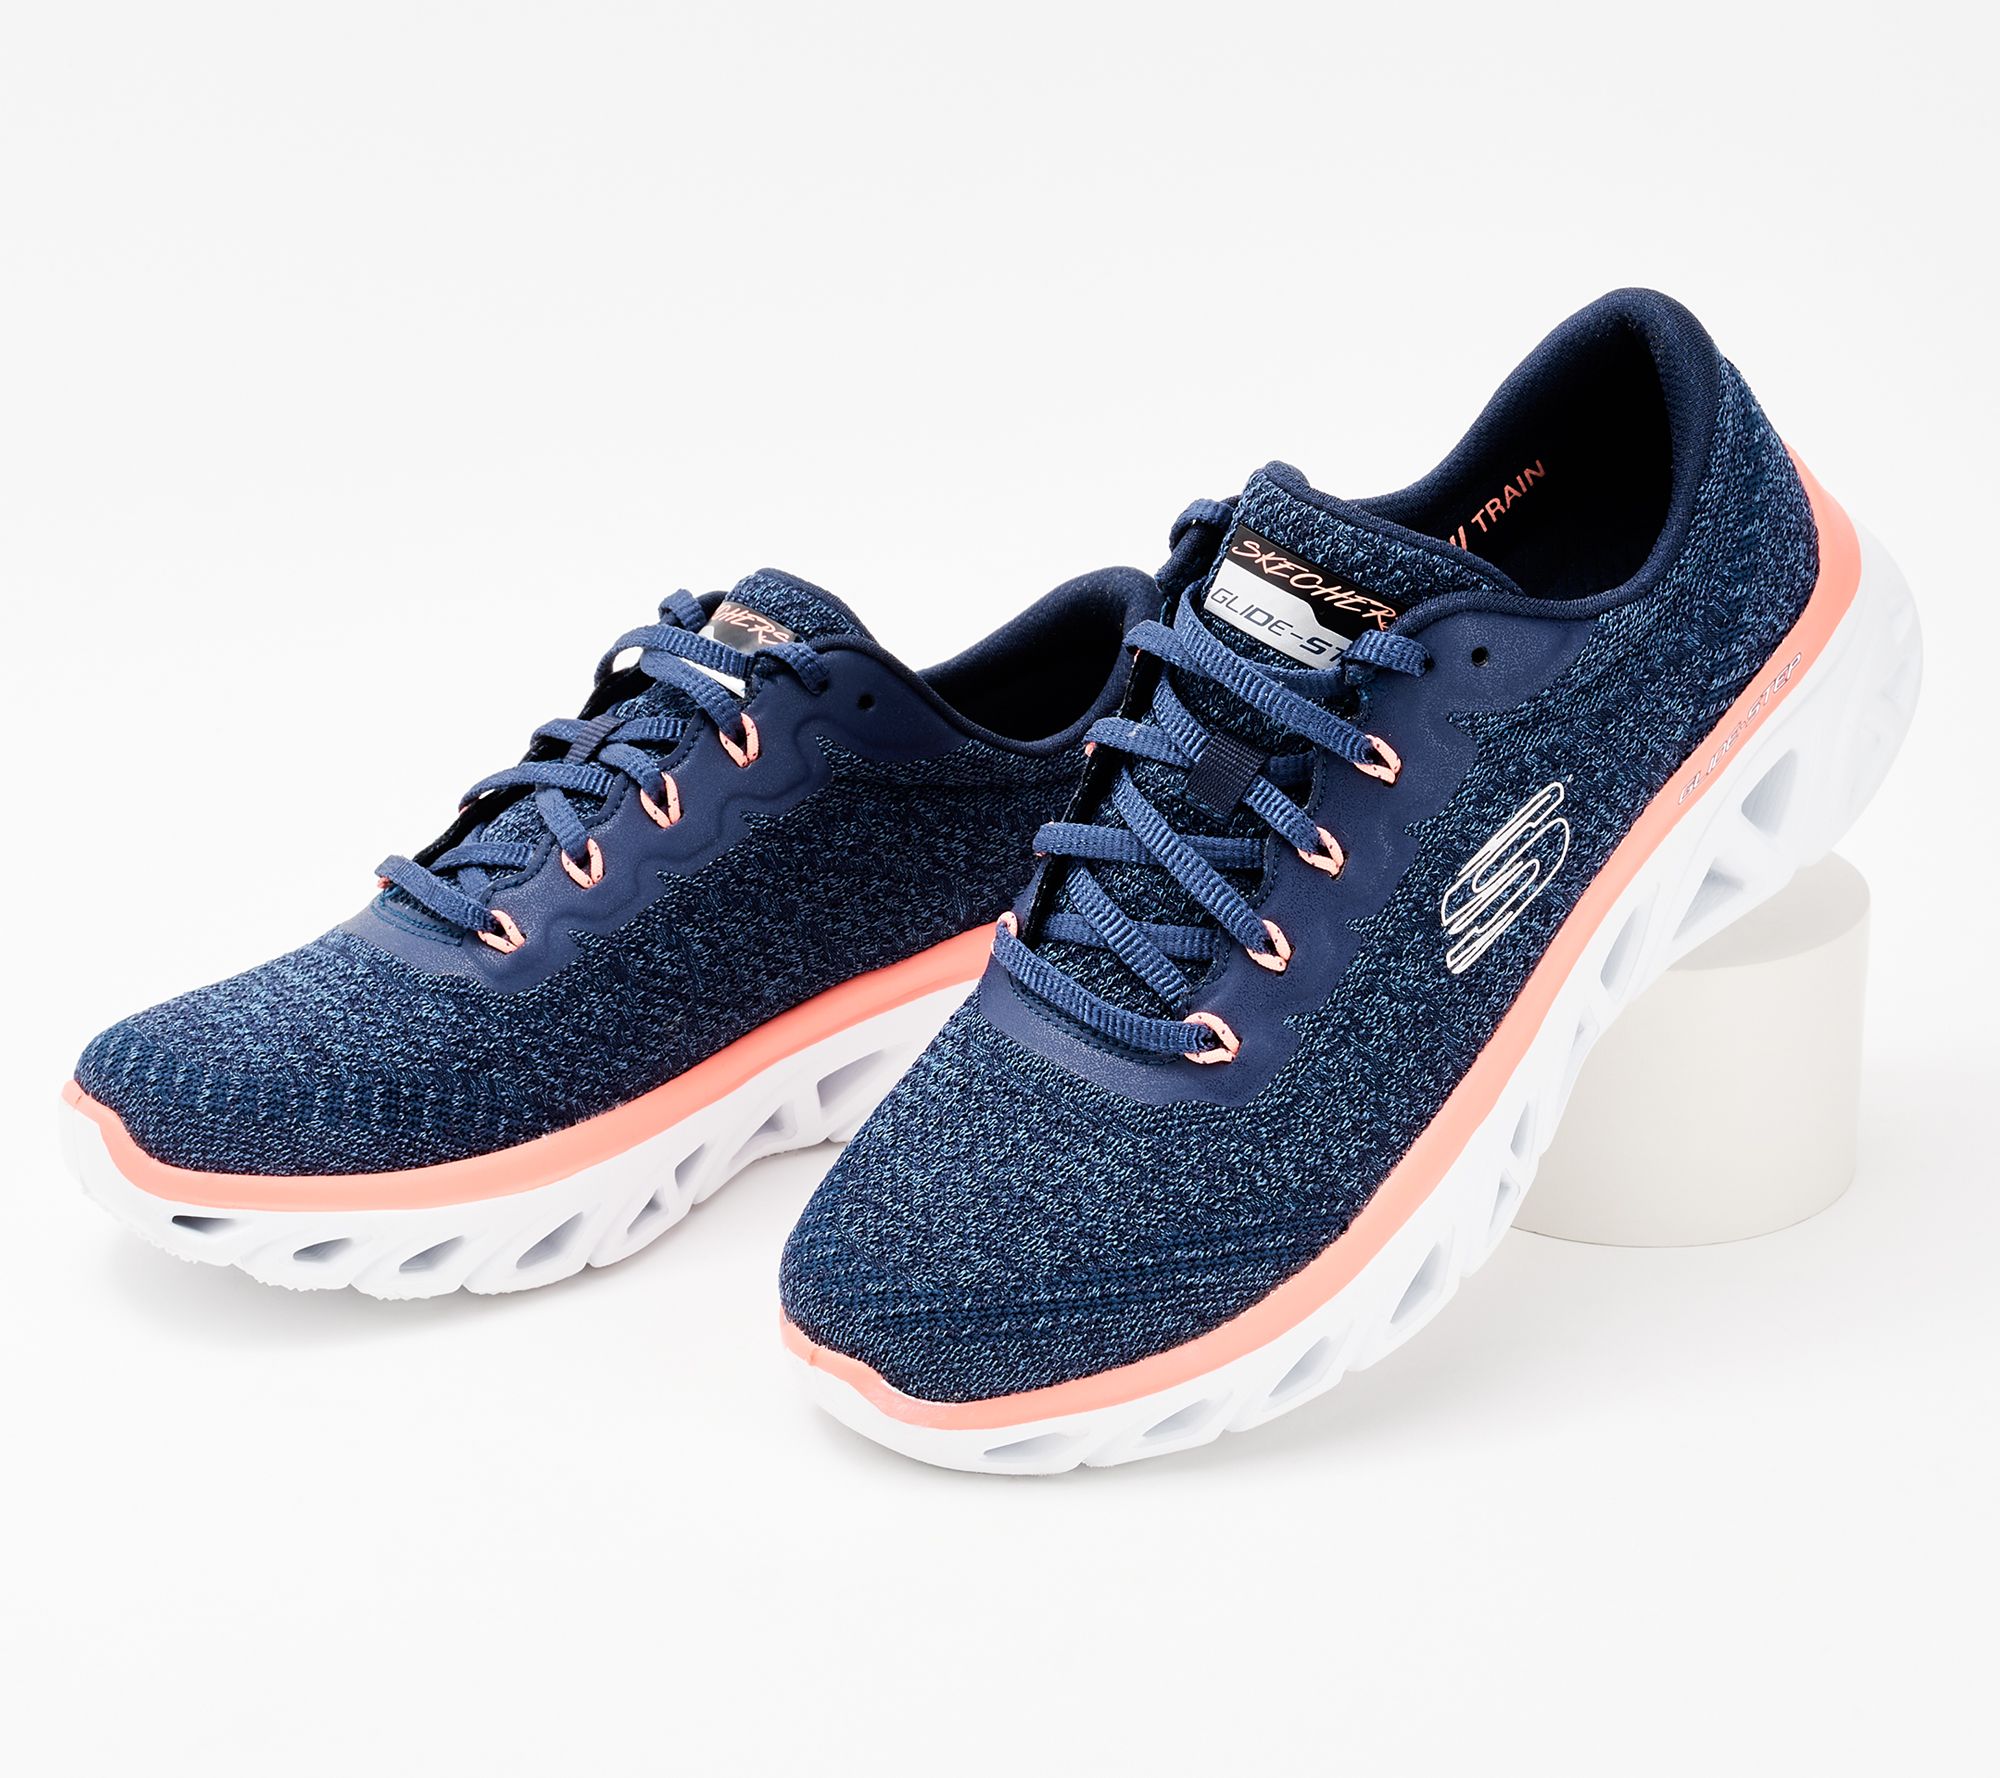 Skechers Glide Step Washable Knit Lace-Up Sneaker Sneakers